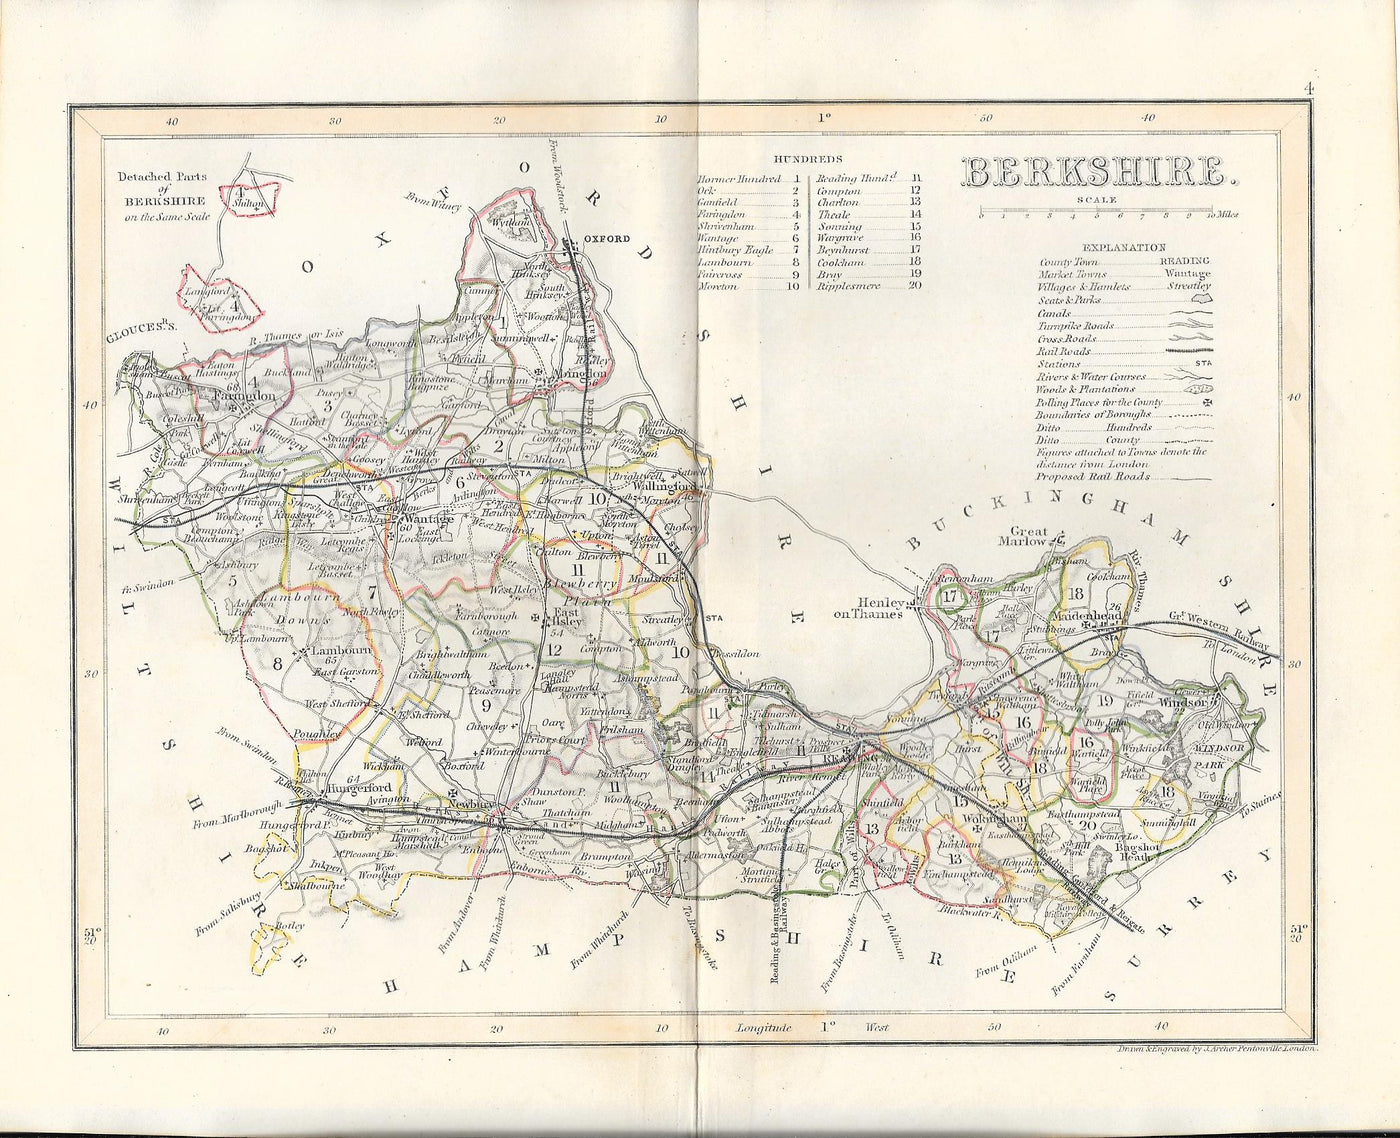 Berkshire antique map by Dugdale published 1845